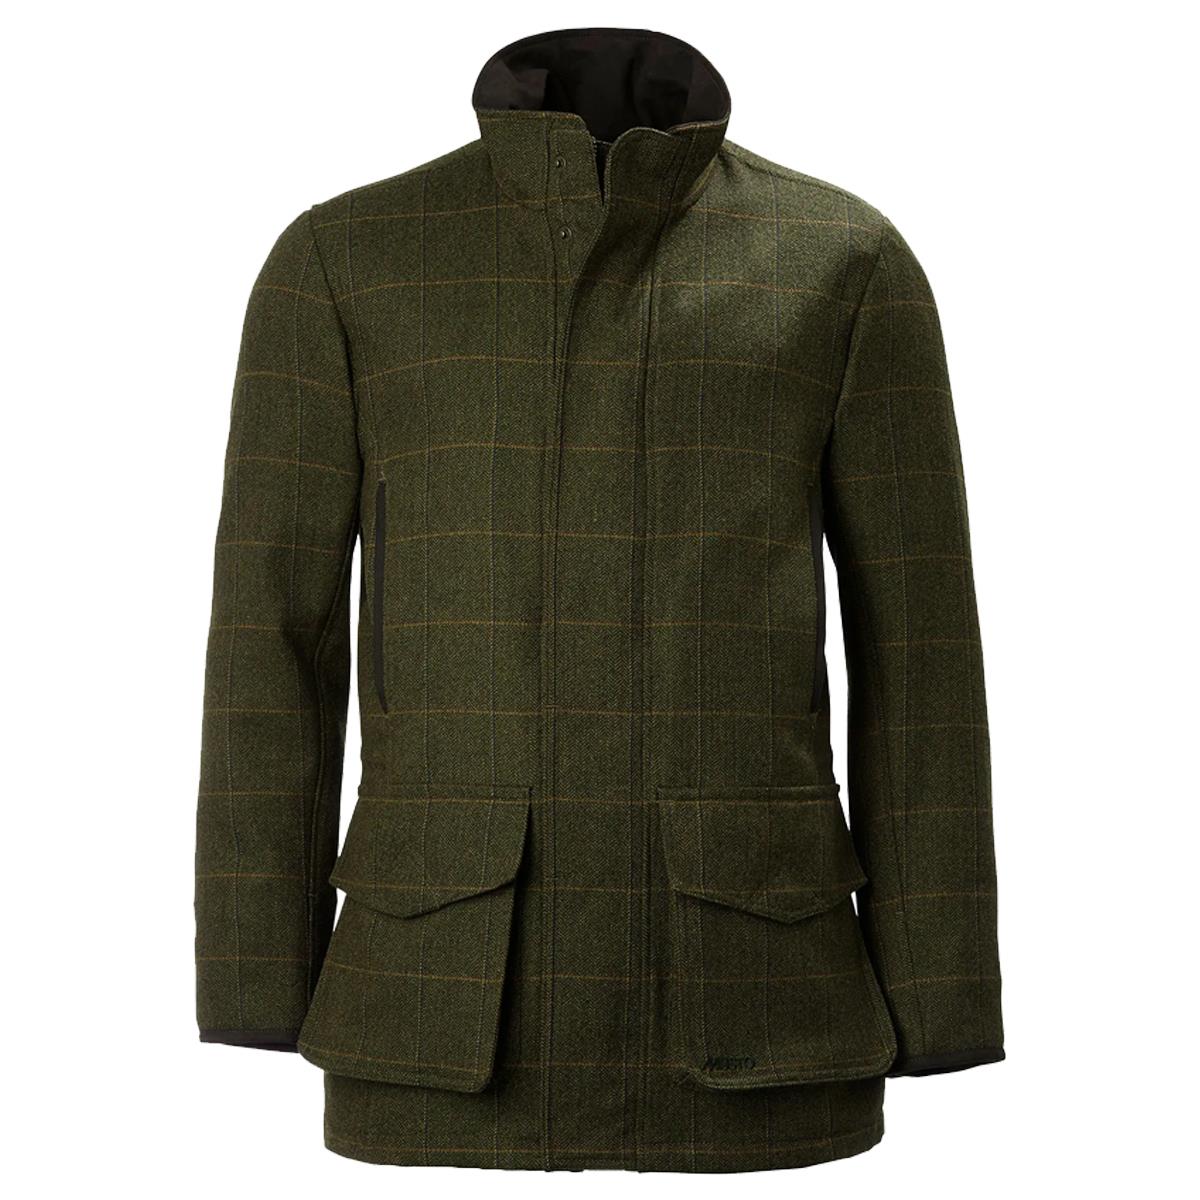 What to wear with tweed jacket?